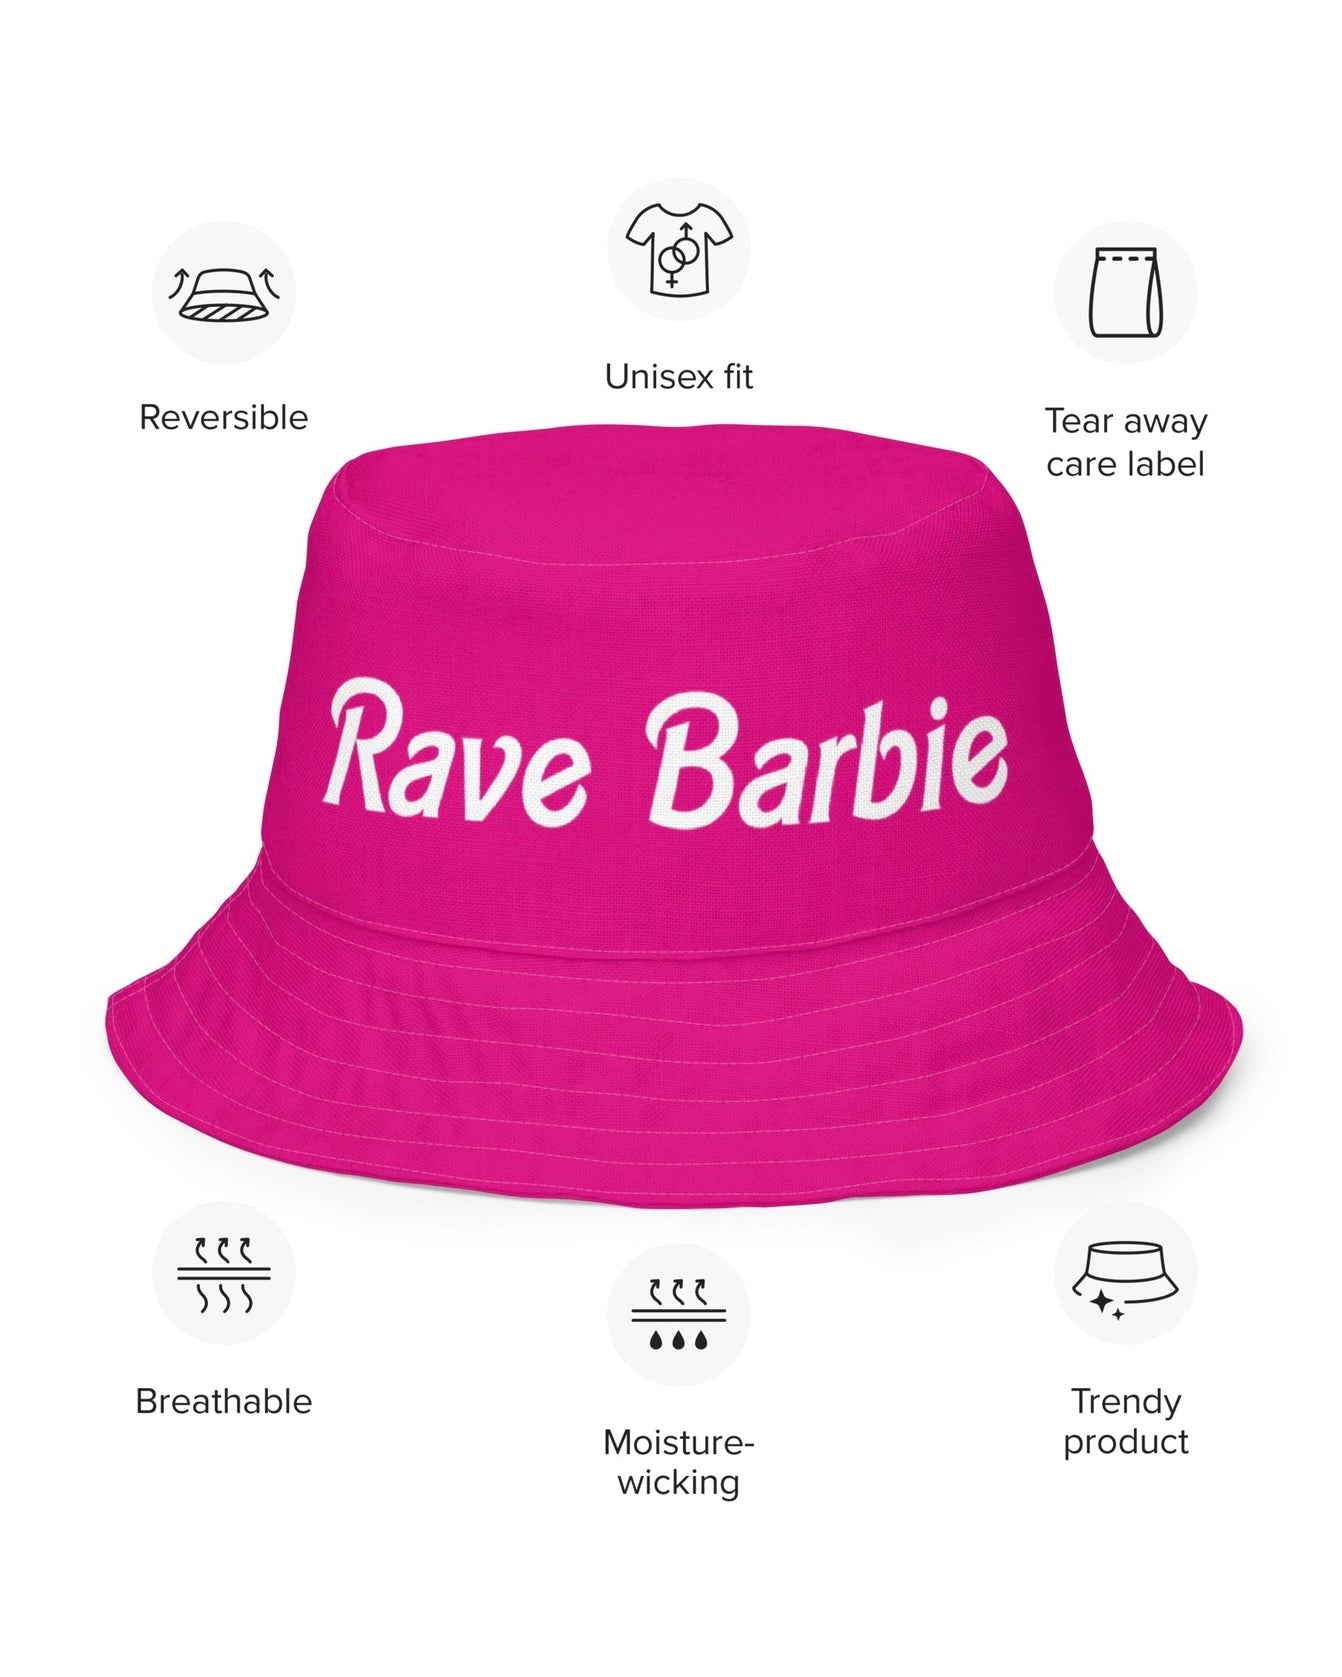 Rave Barbie Reversible Bucket Hat showing off its features